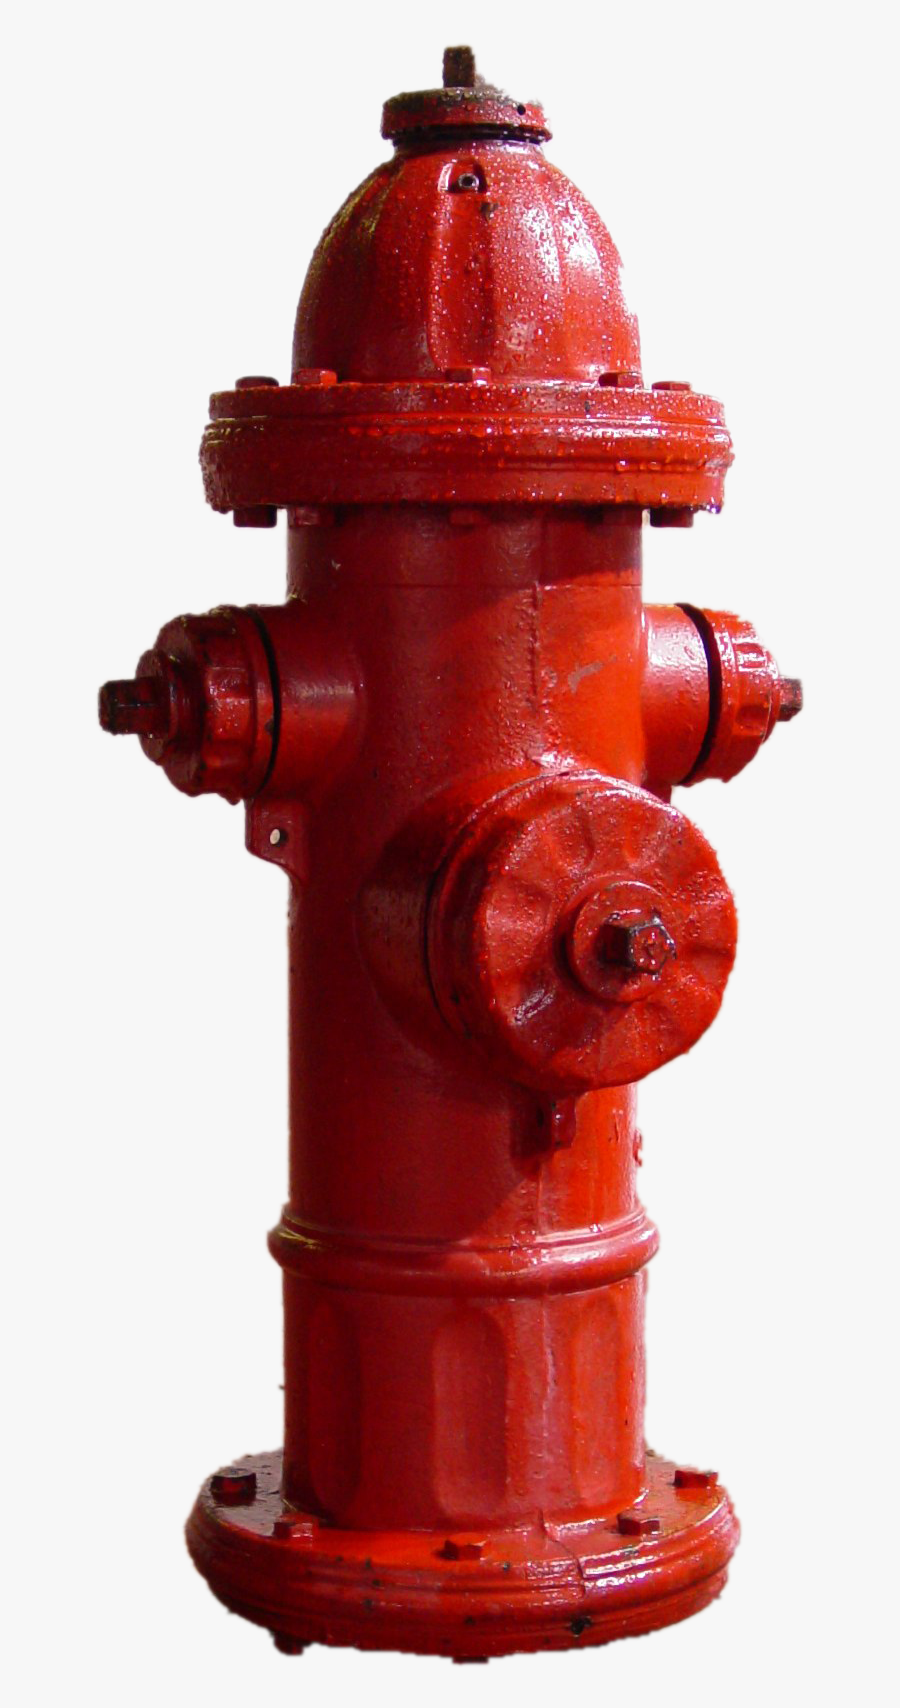 Red Fire Hydrant Transparent File - Fire Hydrant, Transparent Clipart